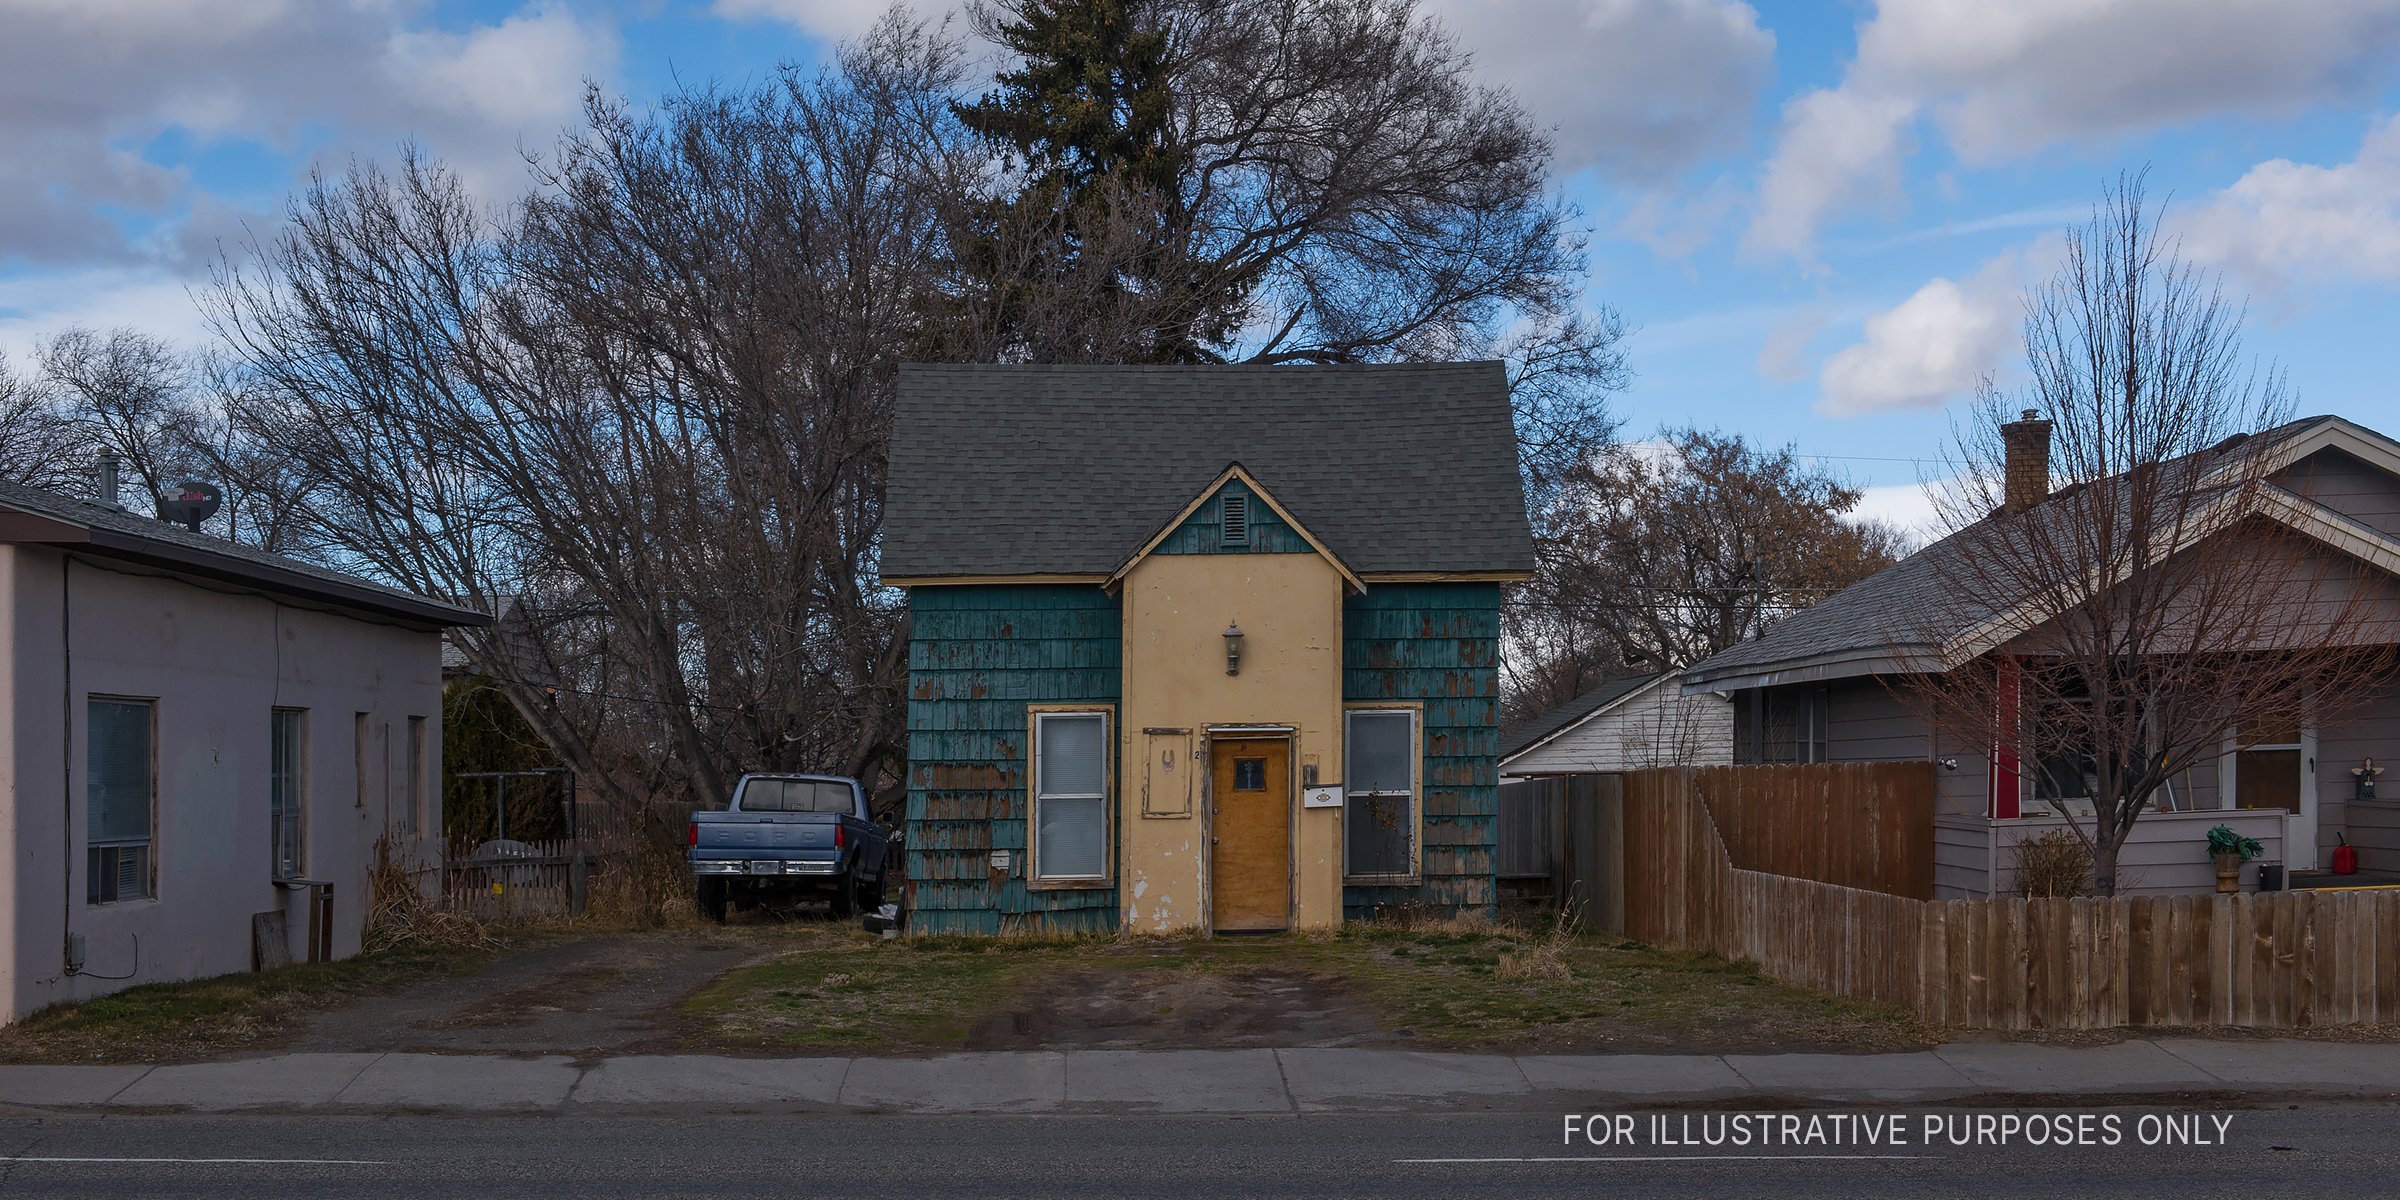 Source: Shutterstock | A small, shabby house in a neighborhood. 